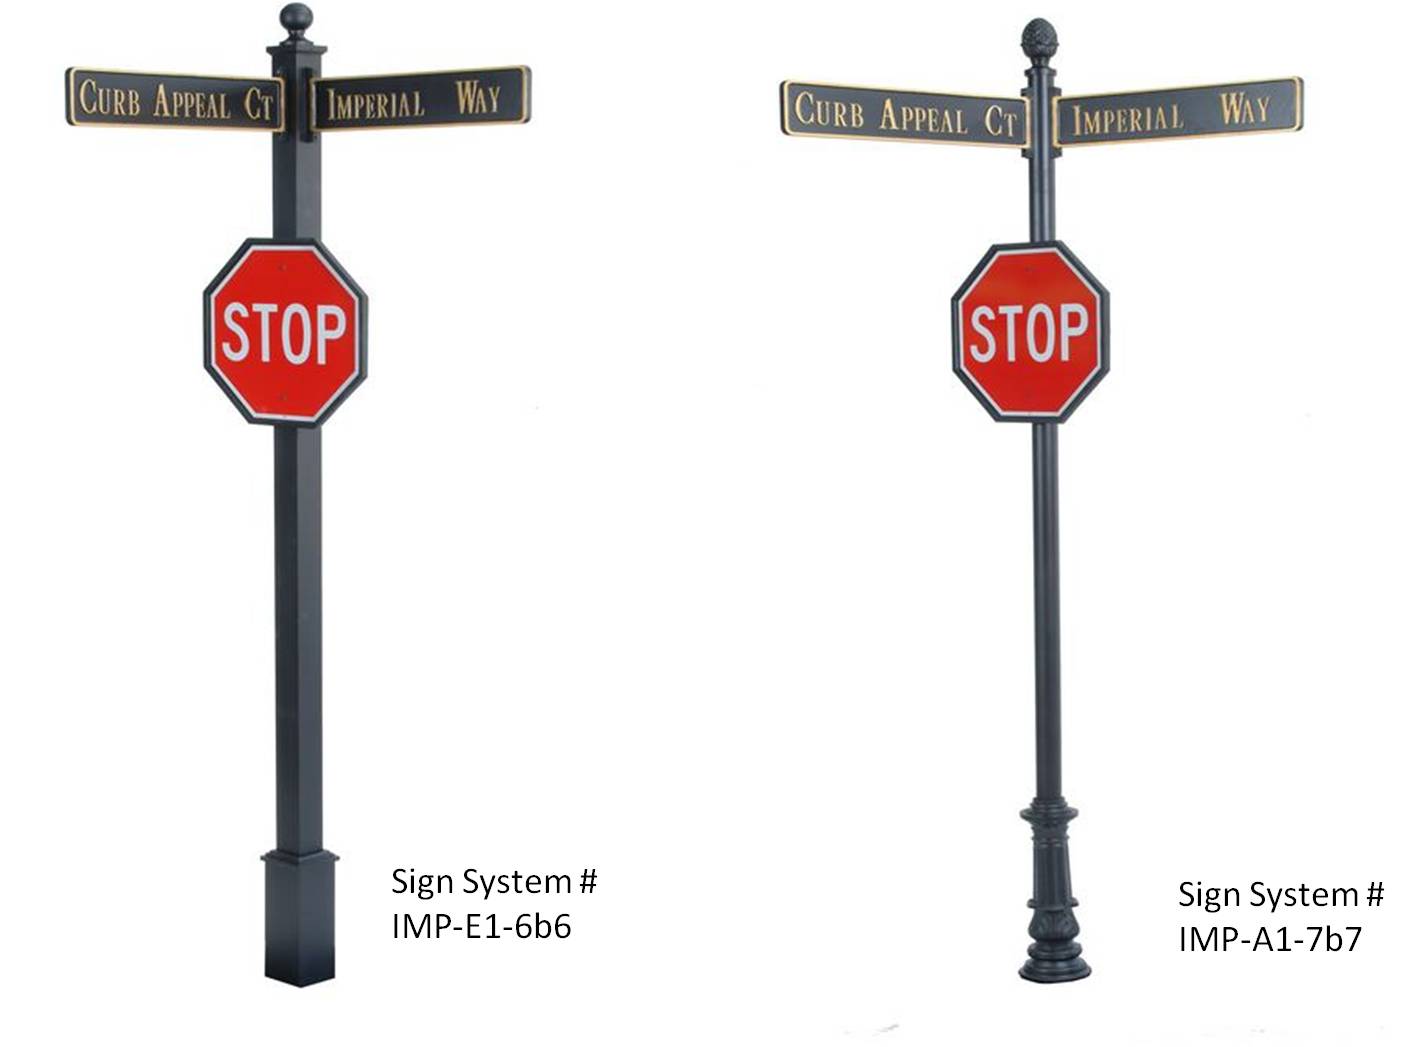 Imperial Street Name Traffic Sign Systems